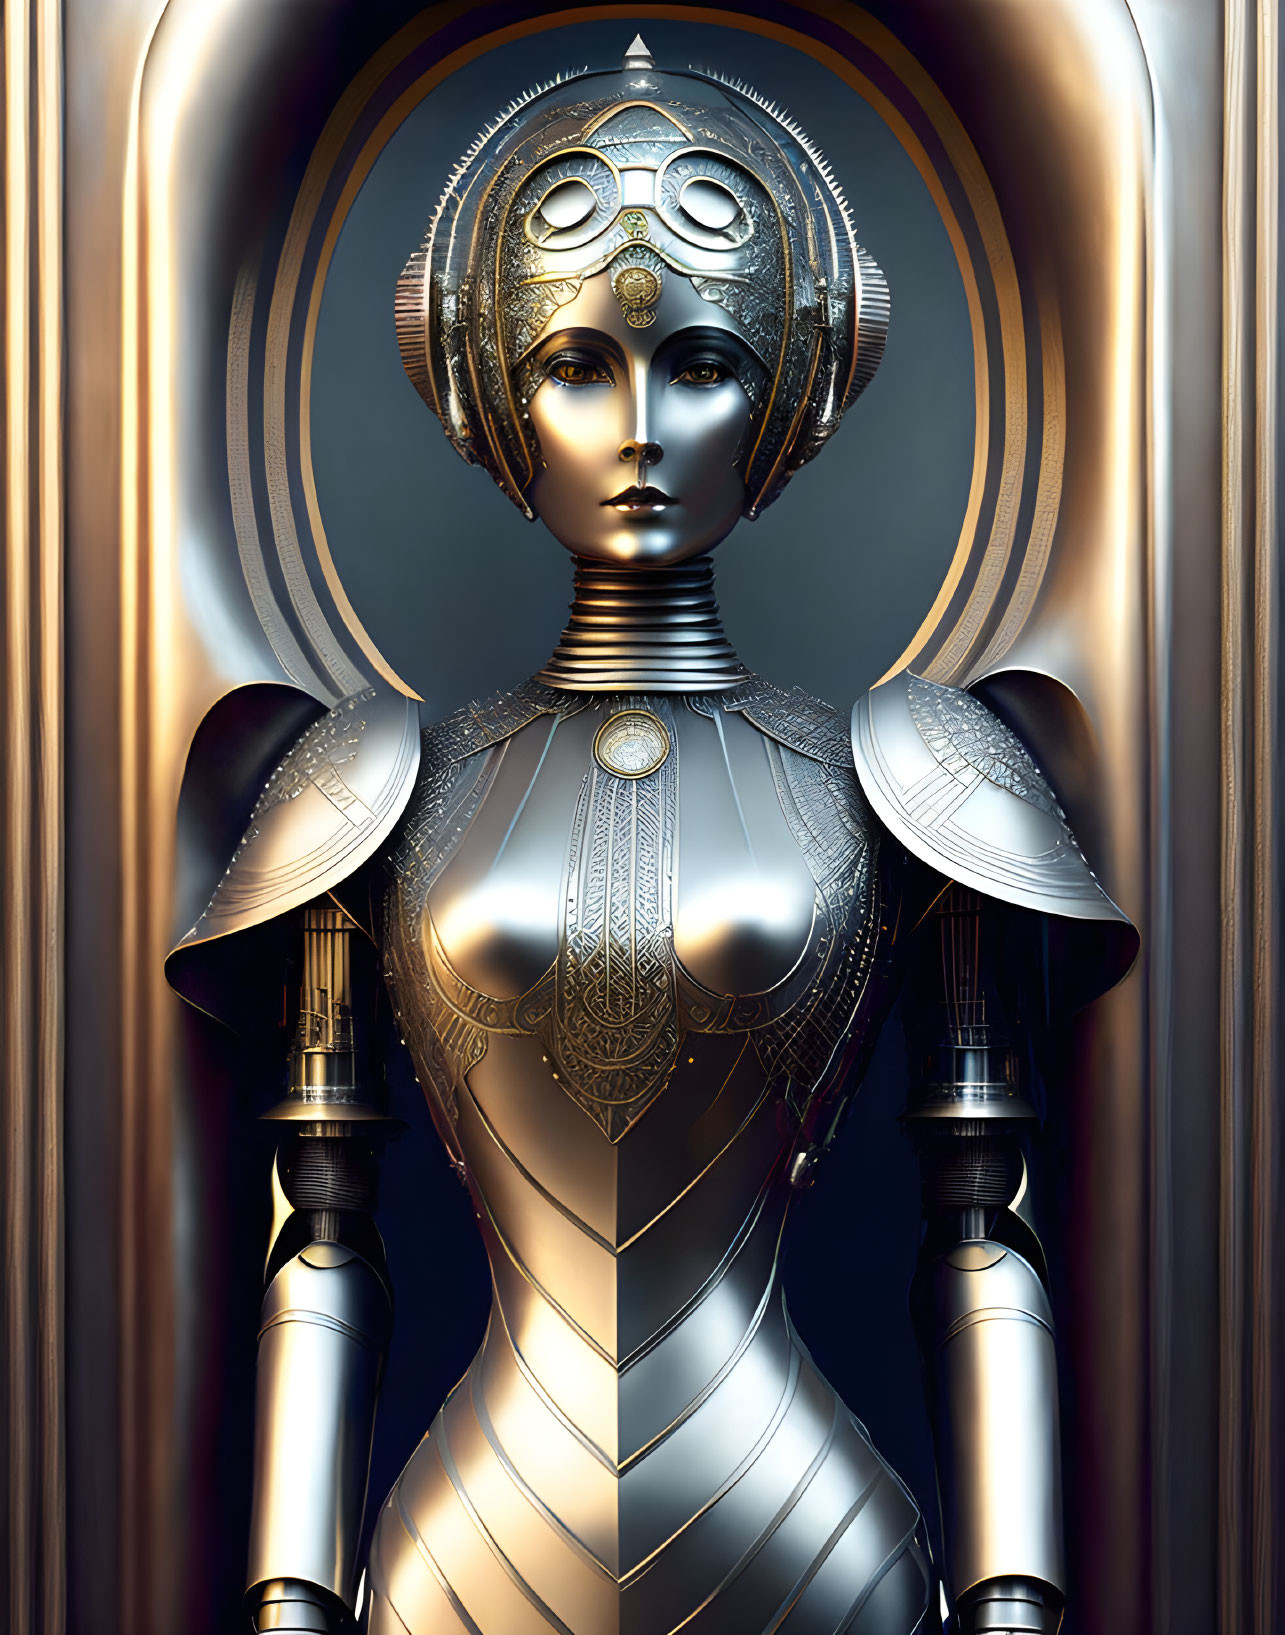 Futuristic female robot in ornate metallic headpiece and body armor on golden-curved backdrop